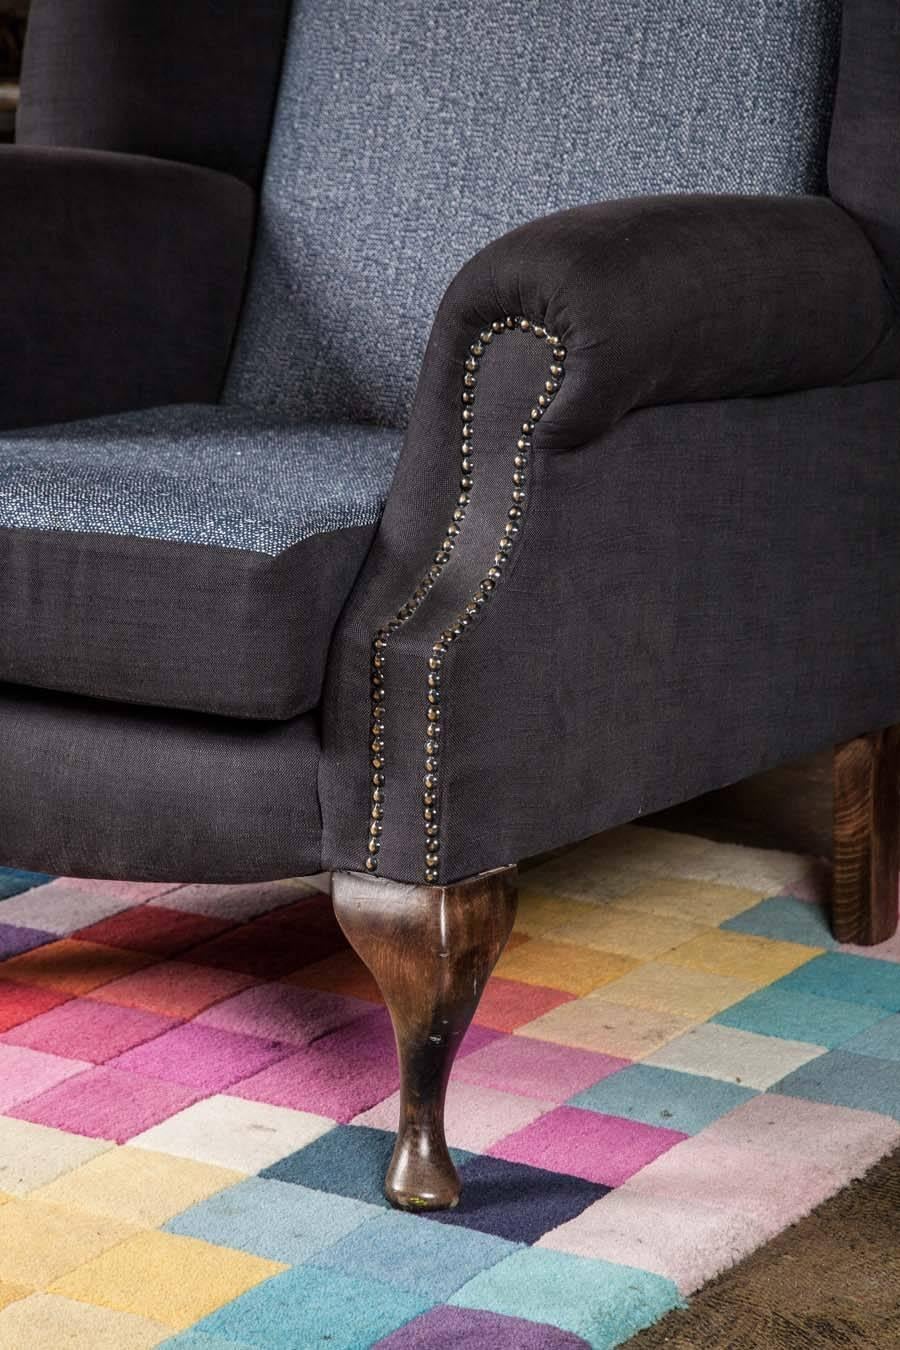 Classic and elegant in design our wingback armchair makes the perfect cosy reading spot! 

This piece is available as part of our bespoke collection and can be made to order in different dimensions and in a range of velvets, wools and leathers.